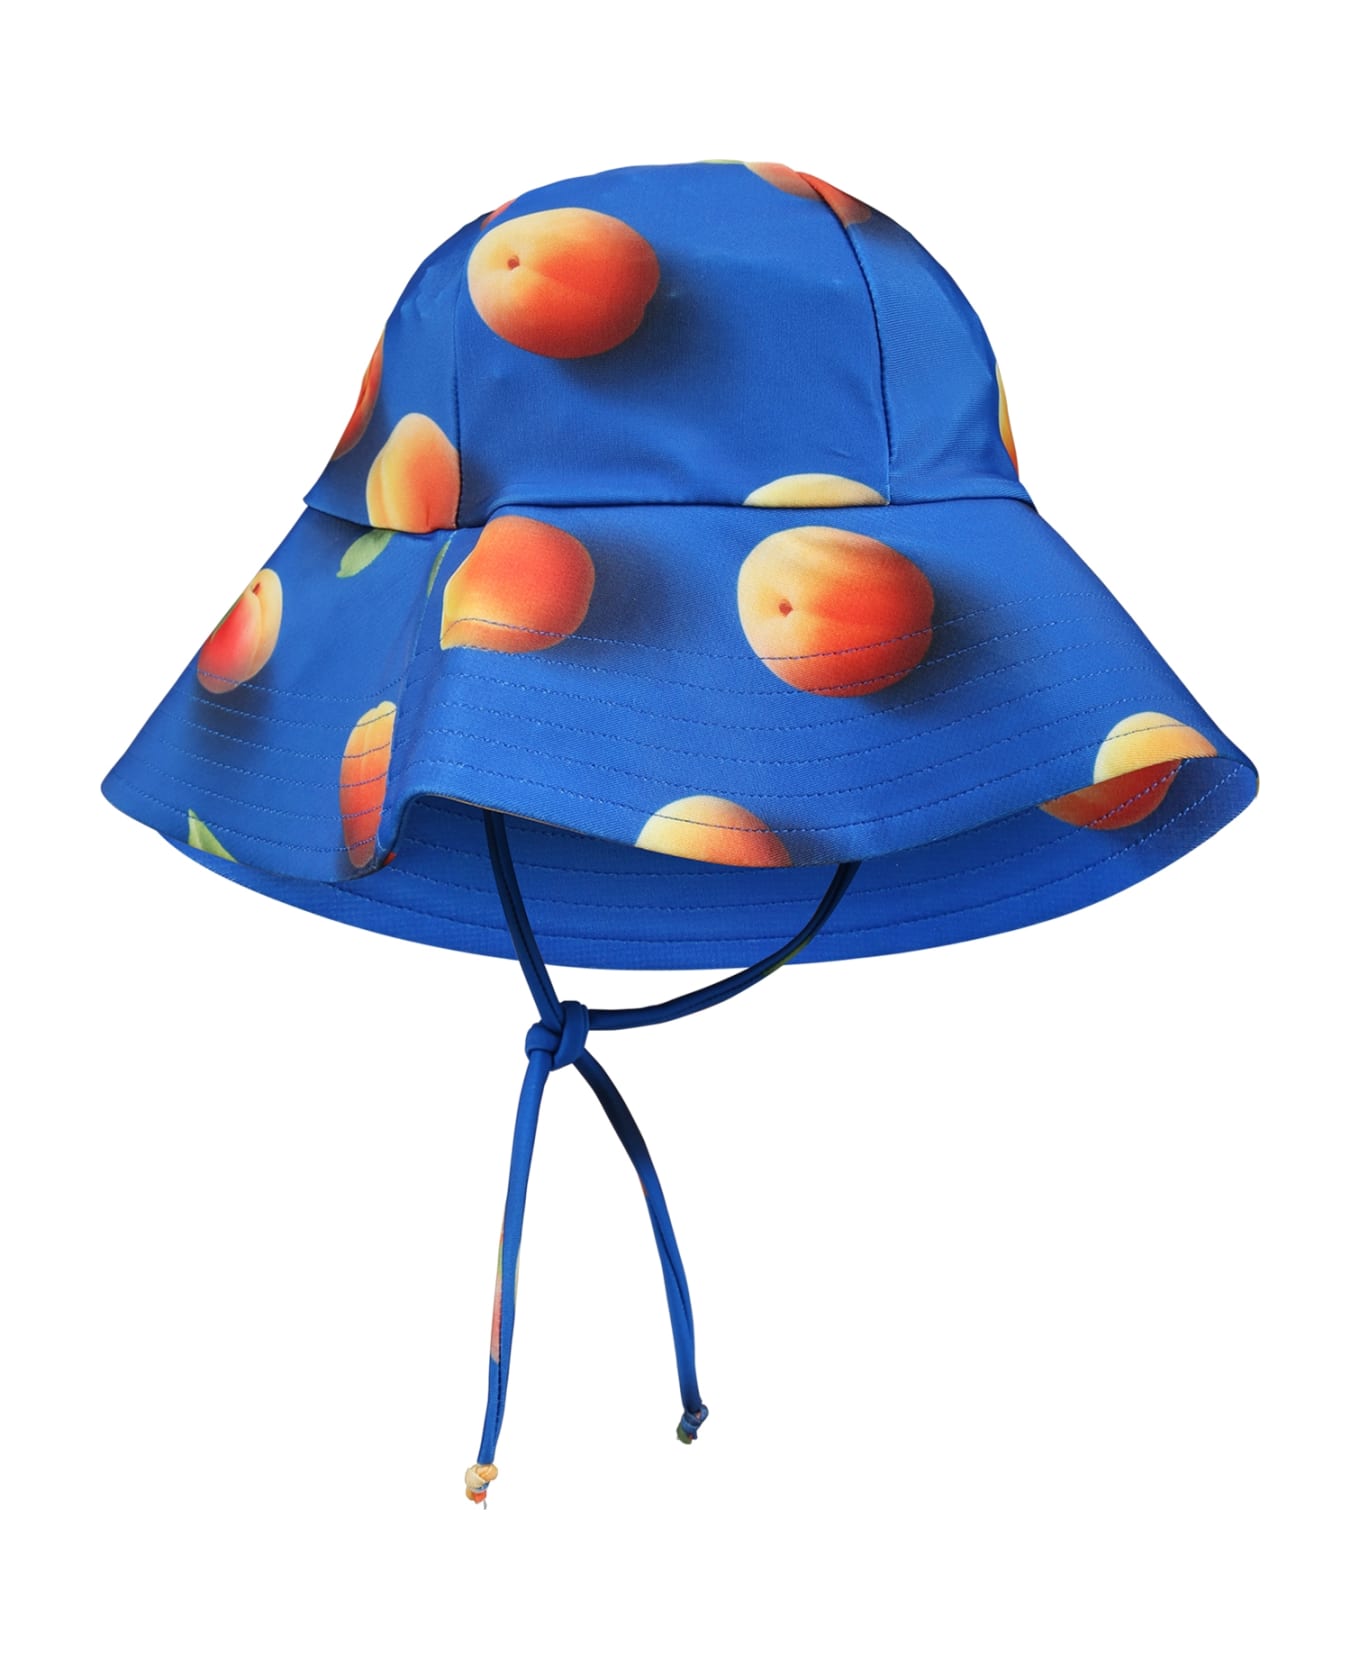 Molo Blue Cloche For Kids With Apricot Print - Blue アクセサリー＆ギフト